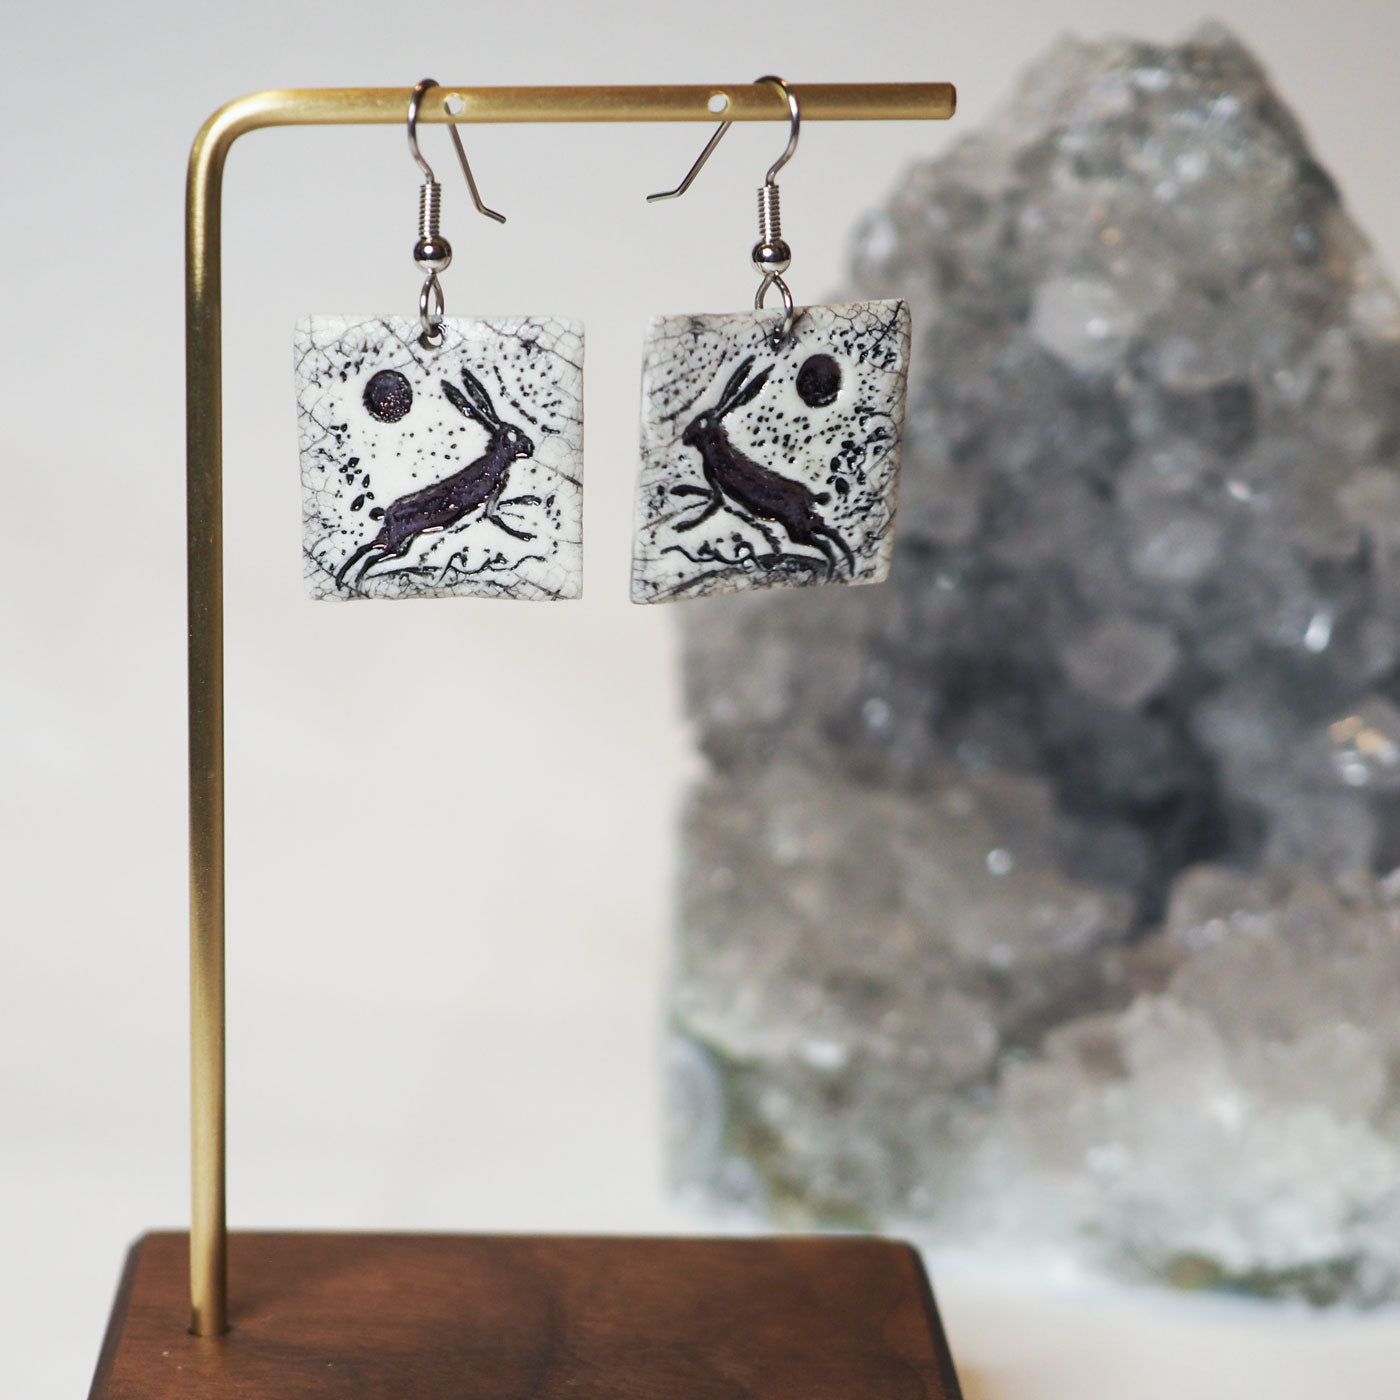 Black and white hand-made ceramic square dangle earrings featuring a scene of a wild rabbit running beneath a full moon